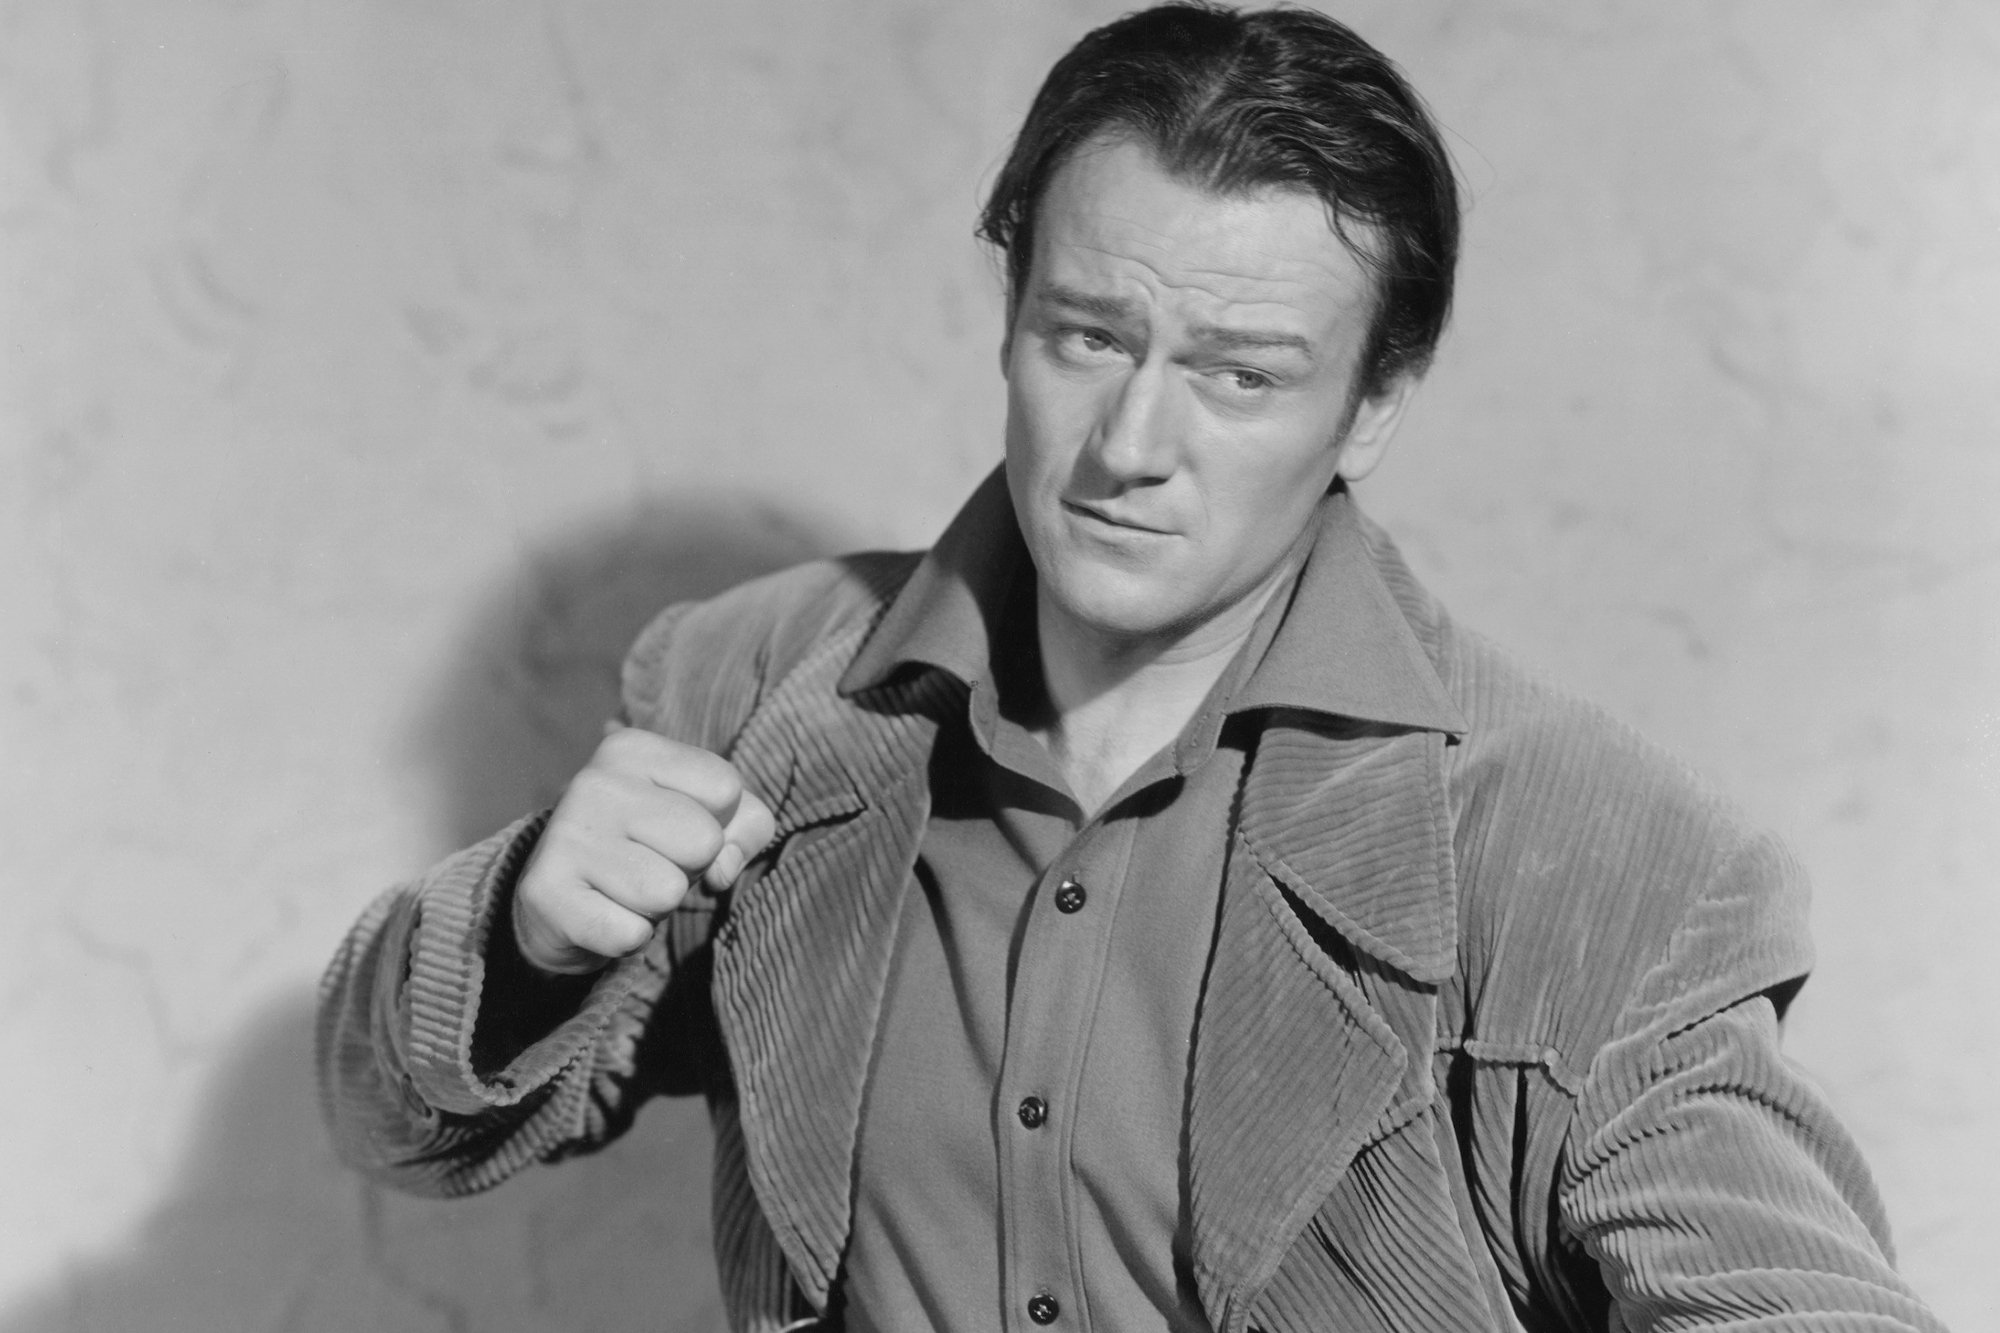 Actor John Wayne, who got in a fight with director Budd Boetticher. A black-and-white picture with him holding up his fist, wearing a button-up shirt under a jacket.